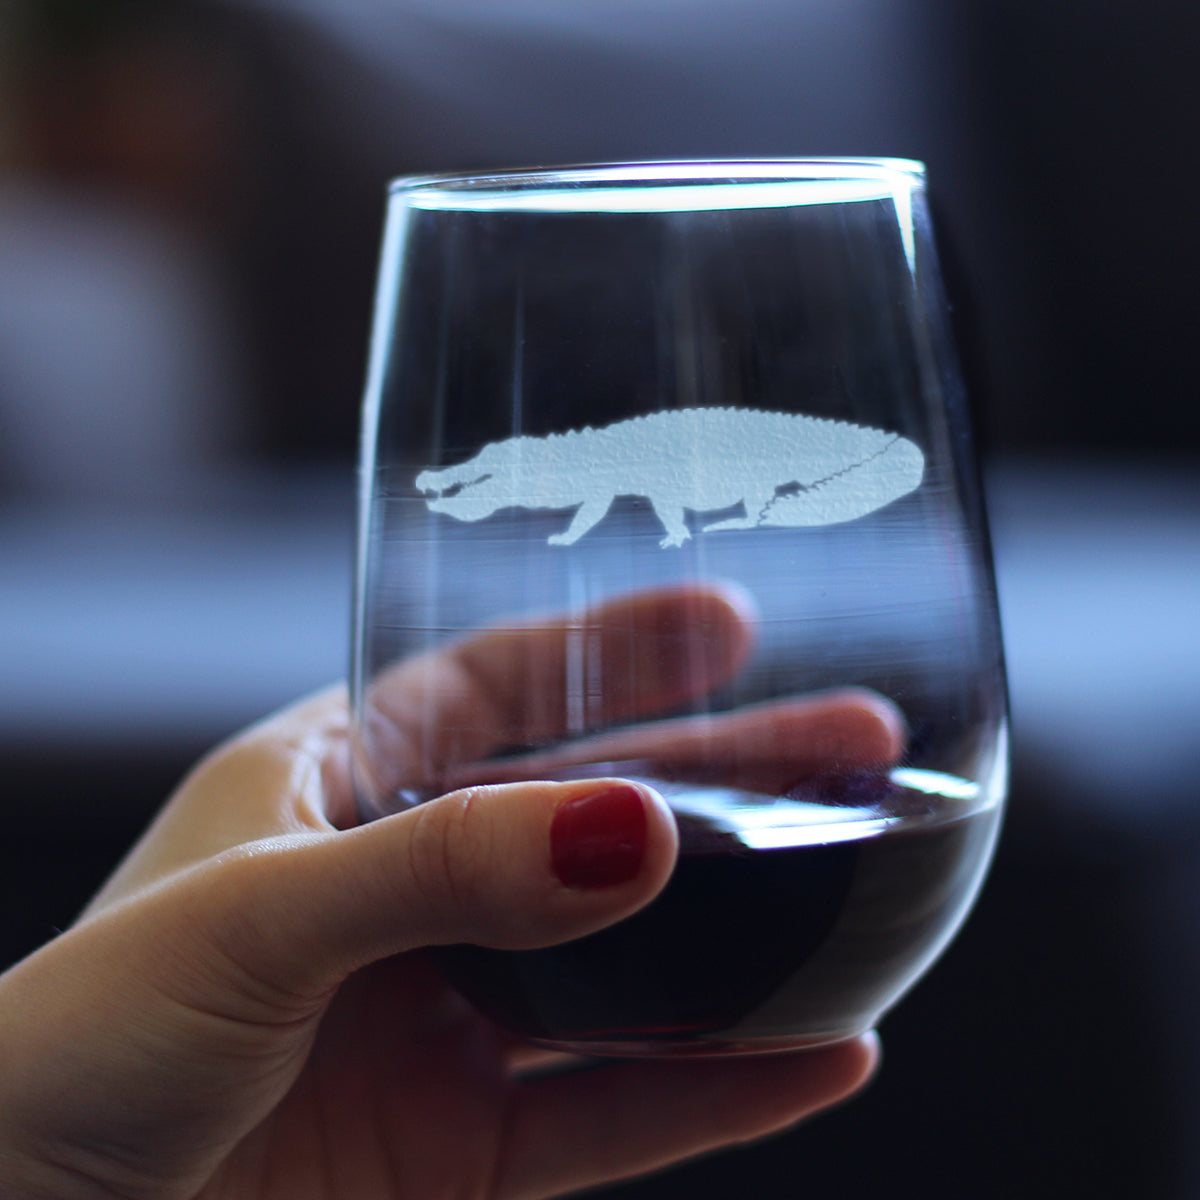 Alligator Stemless Wine Glass - Unique Exotic Animal Gifts for Alligator Lovers - Large 17 Oz Glass